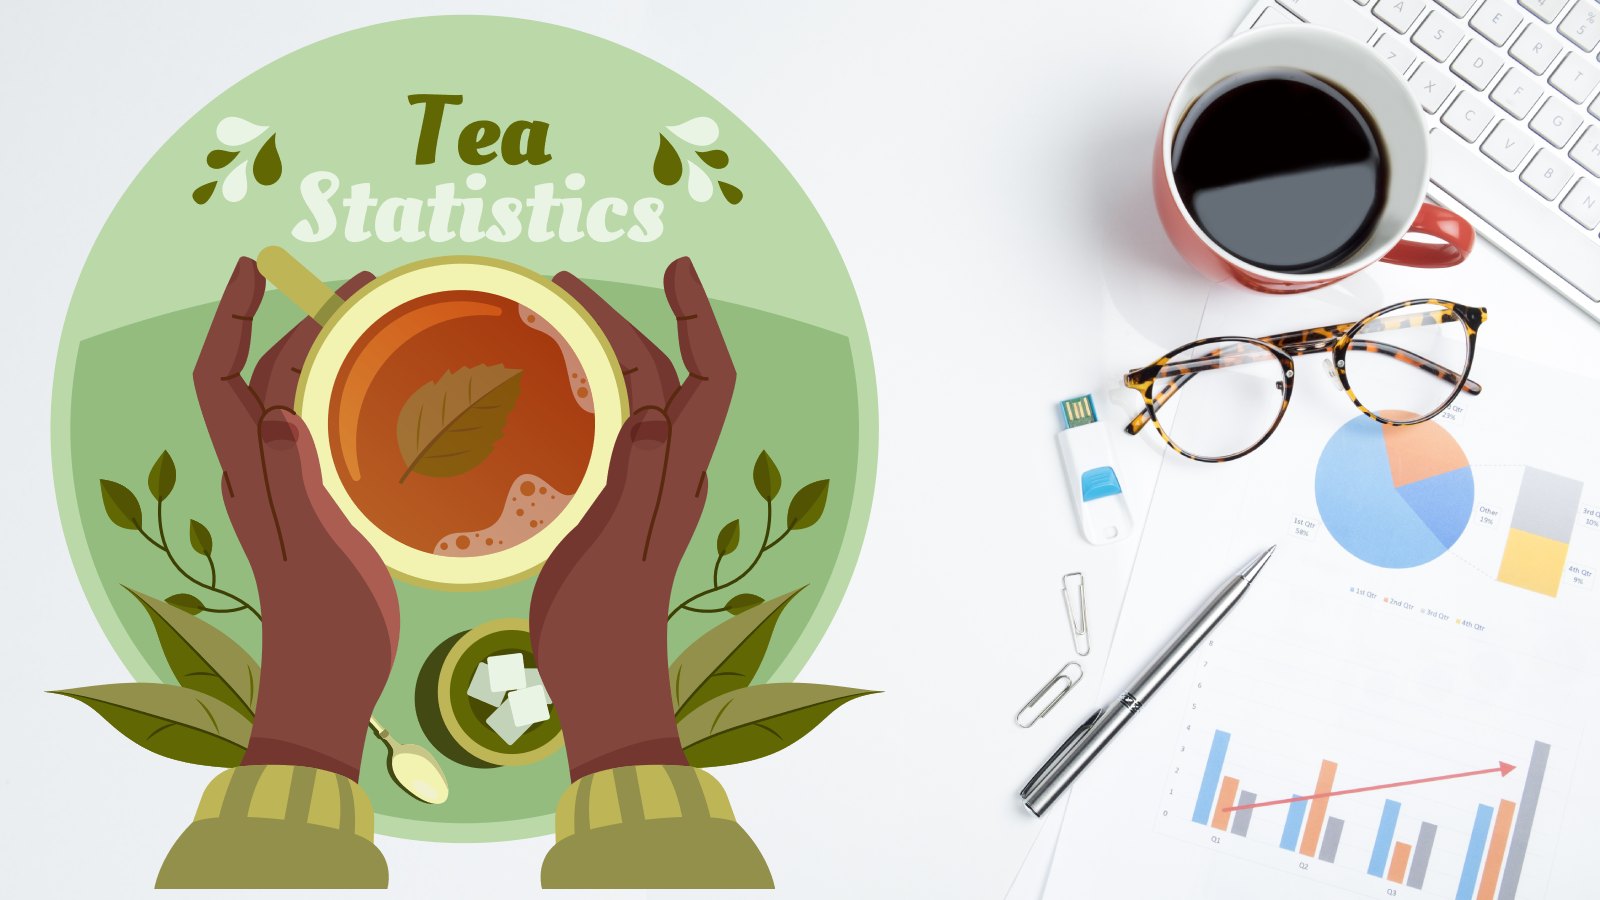 Tea Statistics – By Country, Region, Type, Demographic, Consumption, Revenue in the US, Sales Channel